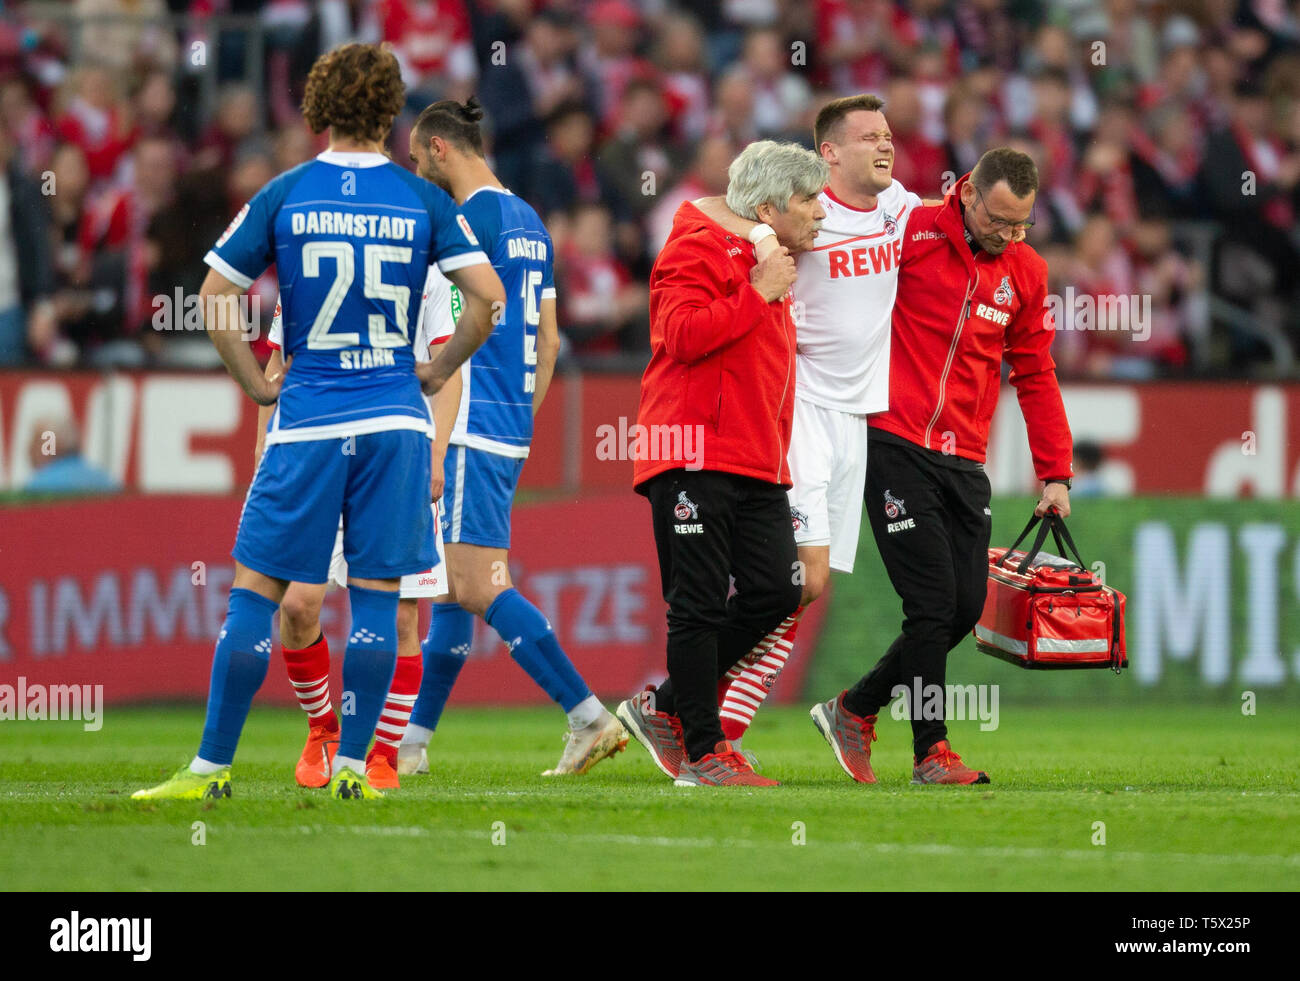 Cologne, Germany, April 26 2019, 2nd league, 1. FC Koeln vs. SV Darmstadt 98: Christian Clemens (Koeln)  verletzt.   DFL REGULATIONS PROHIBIT ANY USE  Stock Photo